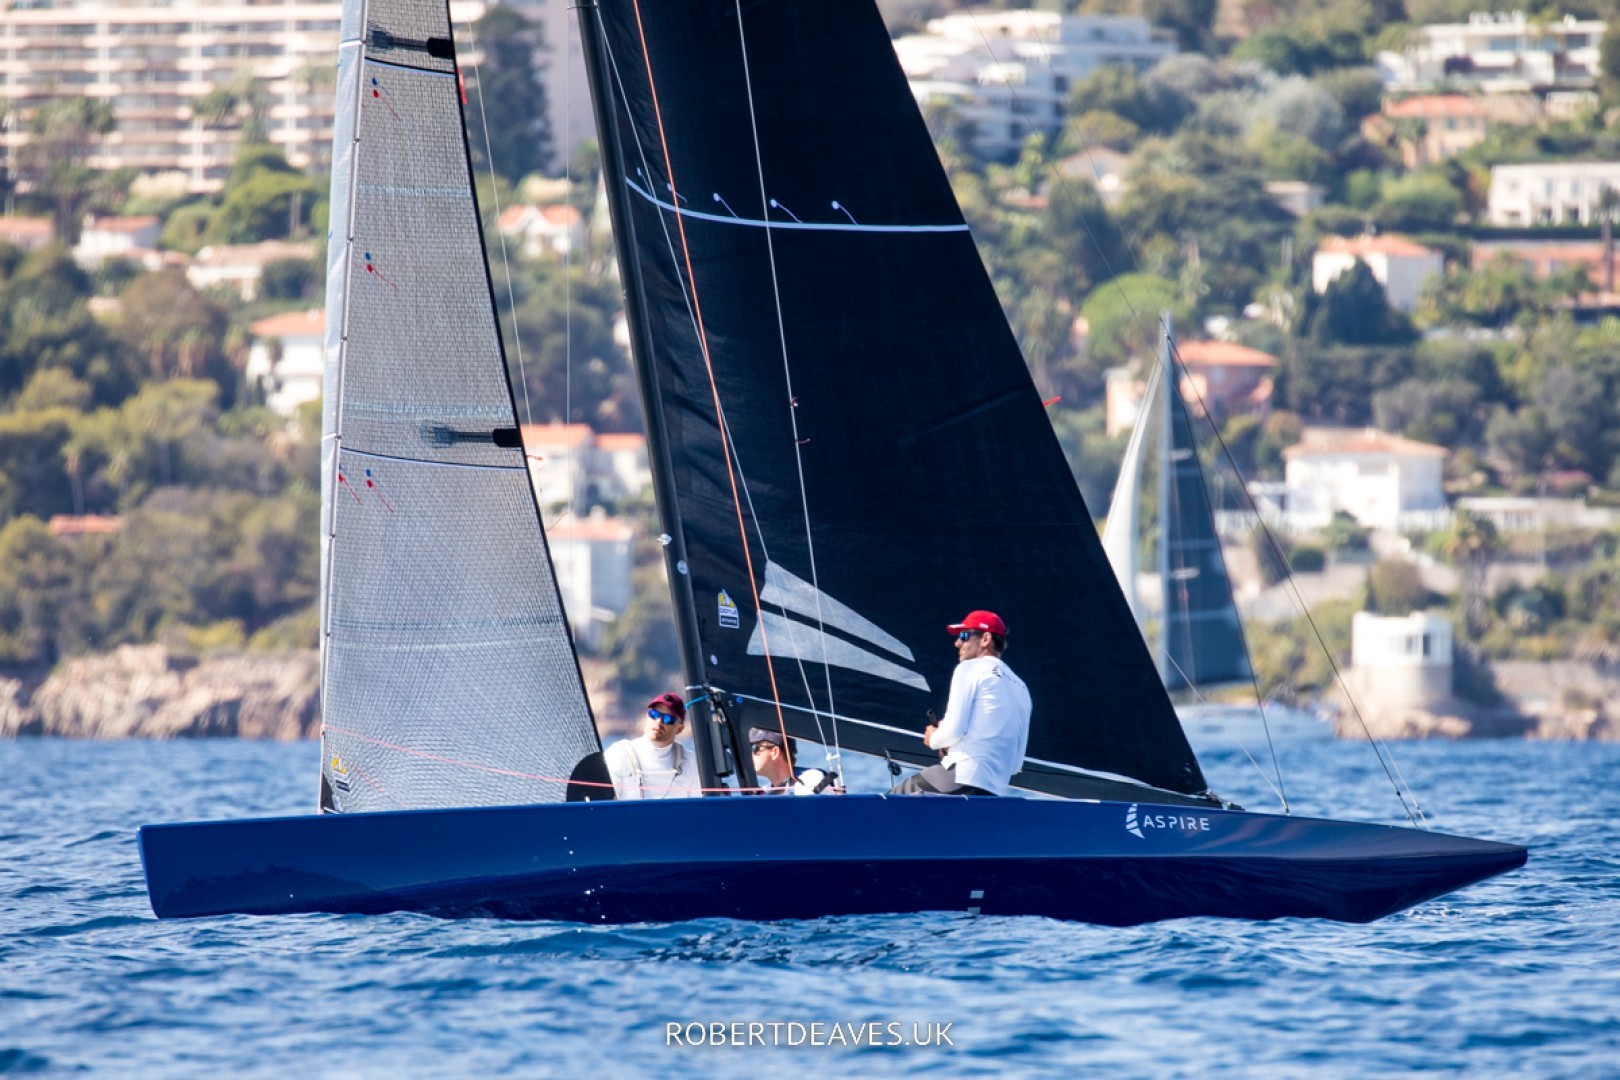 A slow day in Cannes, but hot competition for 5.5 Metre fleet